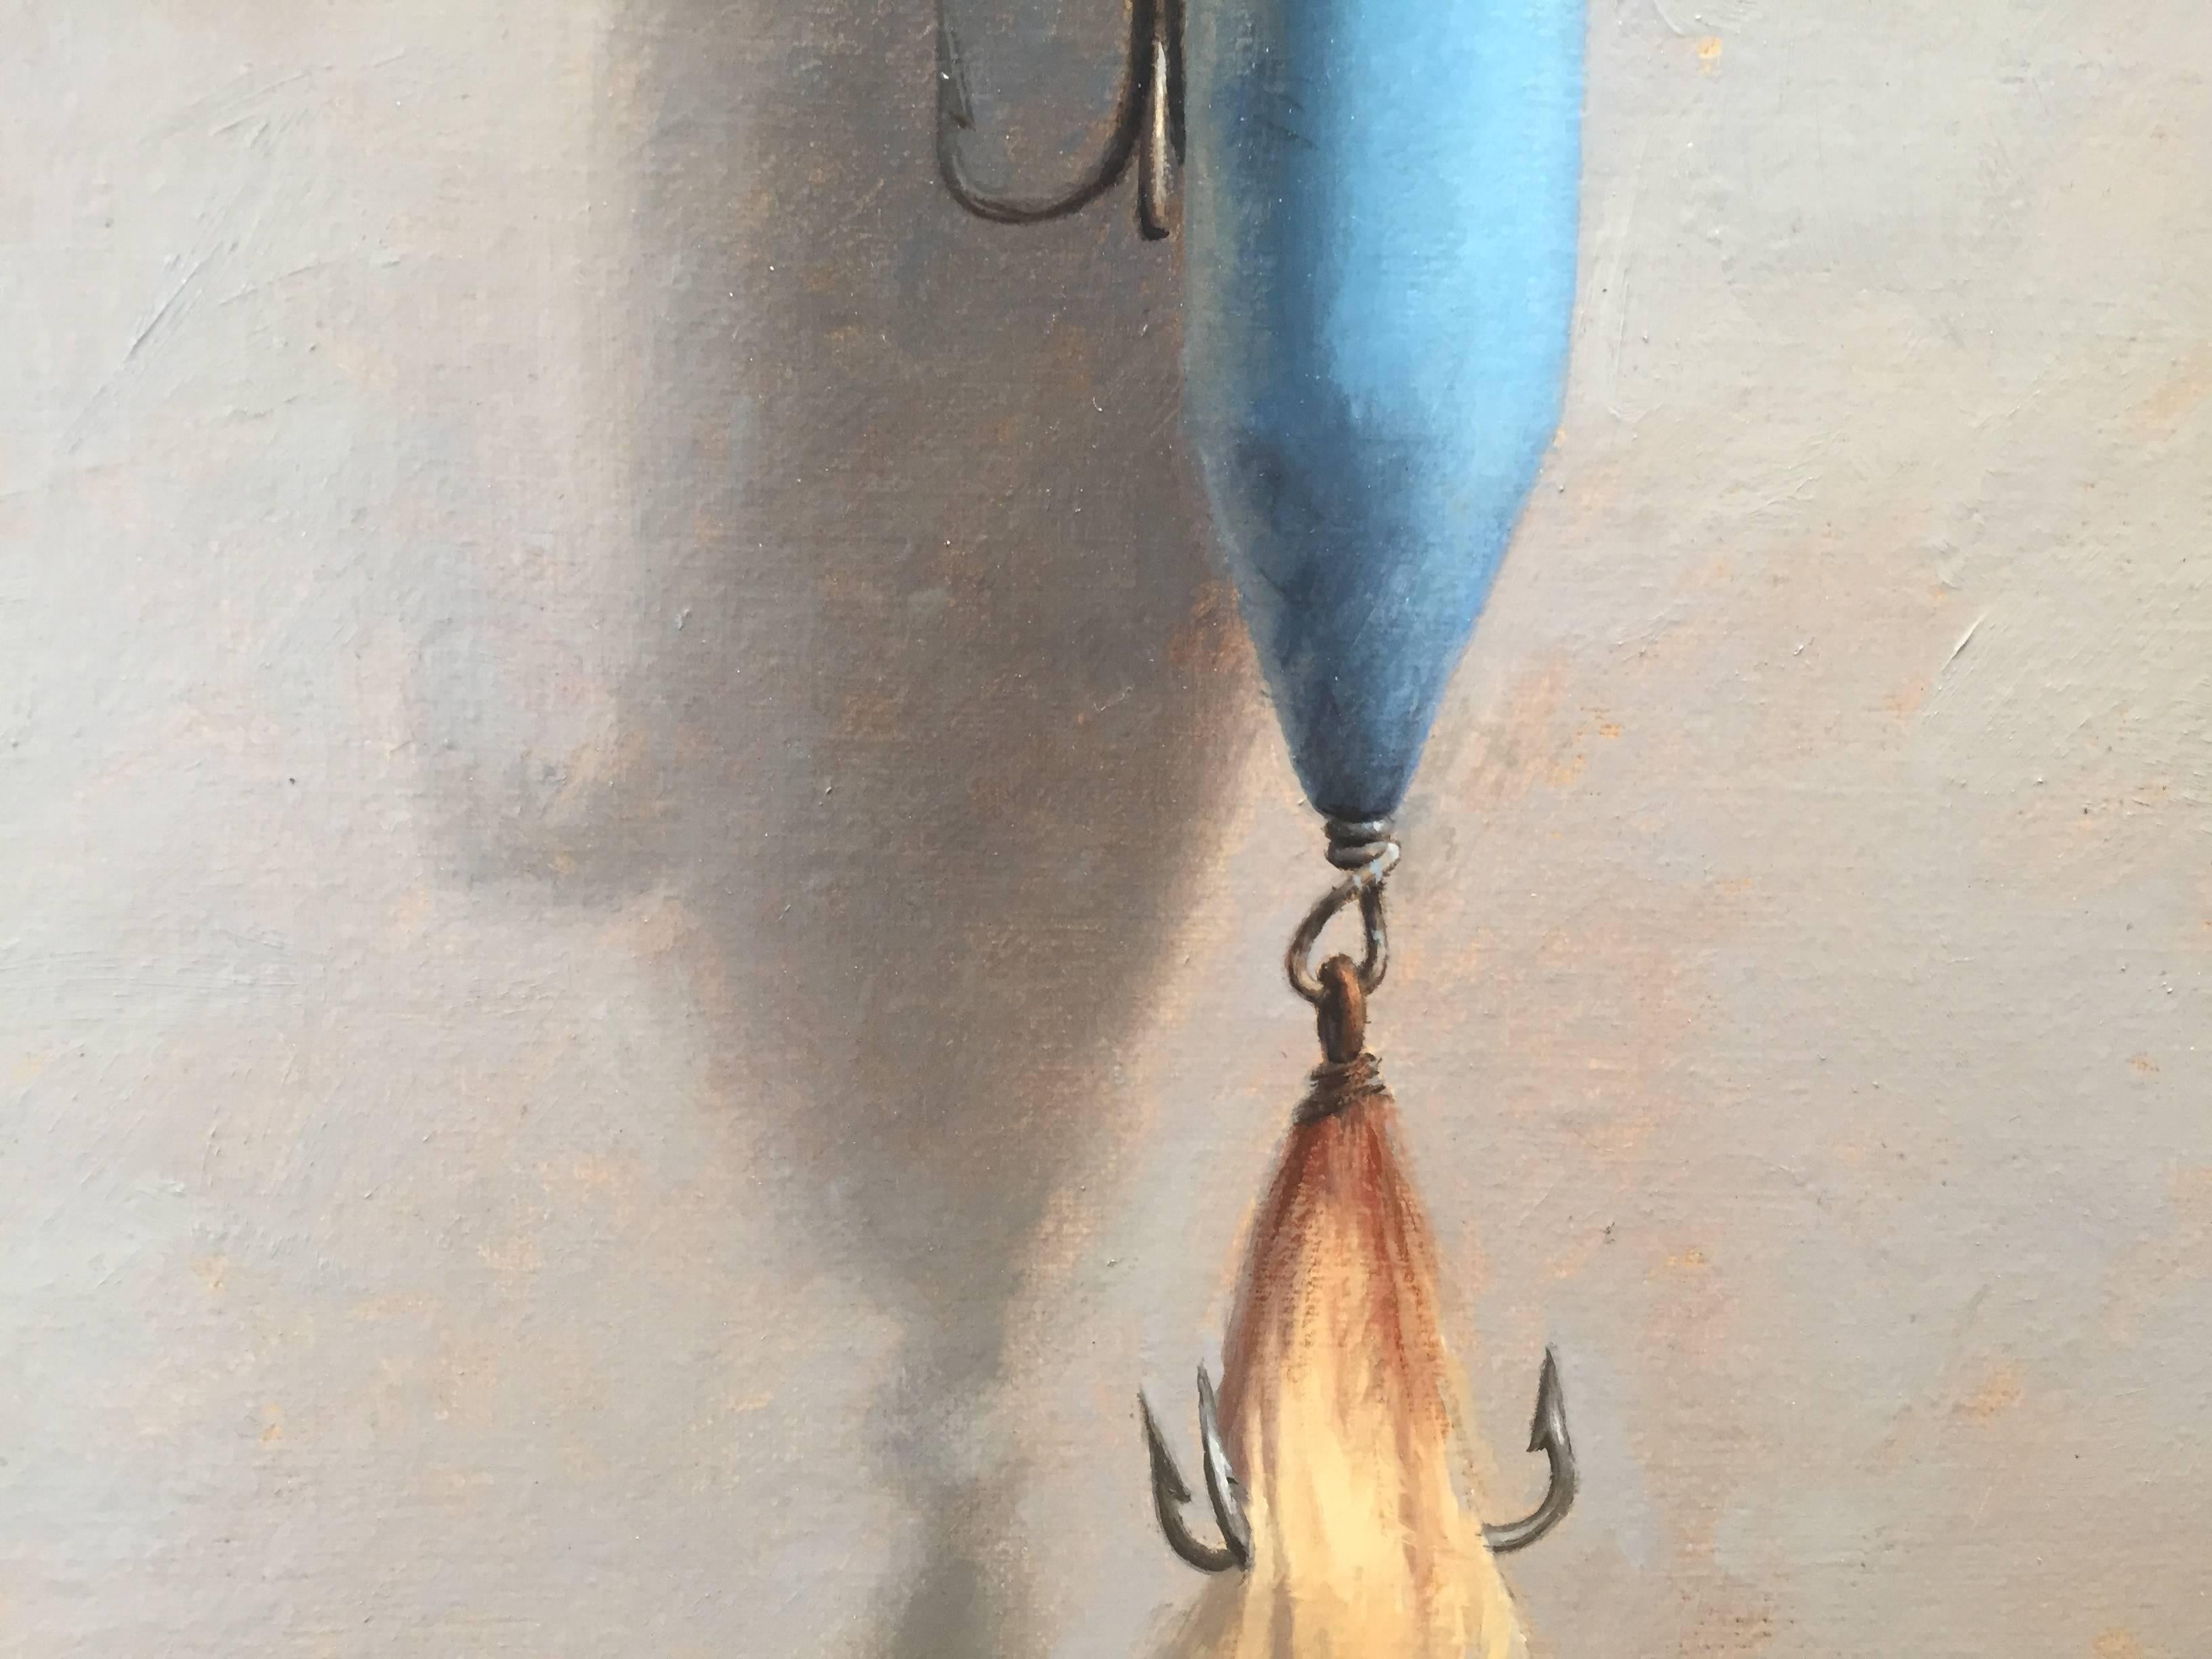 Painted from life in his Connecticut studio, a sky-blue fishing lure hangs from a tiny nail. Small hooks and fishing wire painted with precision. A true contemporary master of Trompe L'oeil. 

John Morfis was born in Glen Cove, Long Island in 1976.